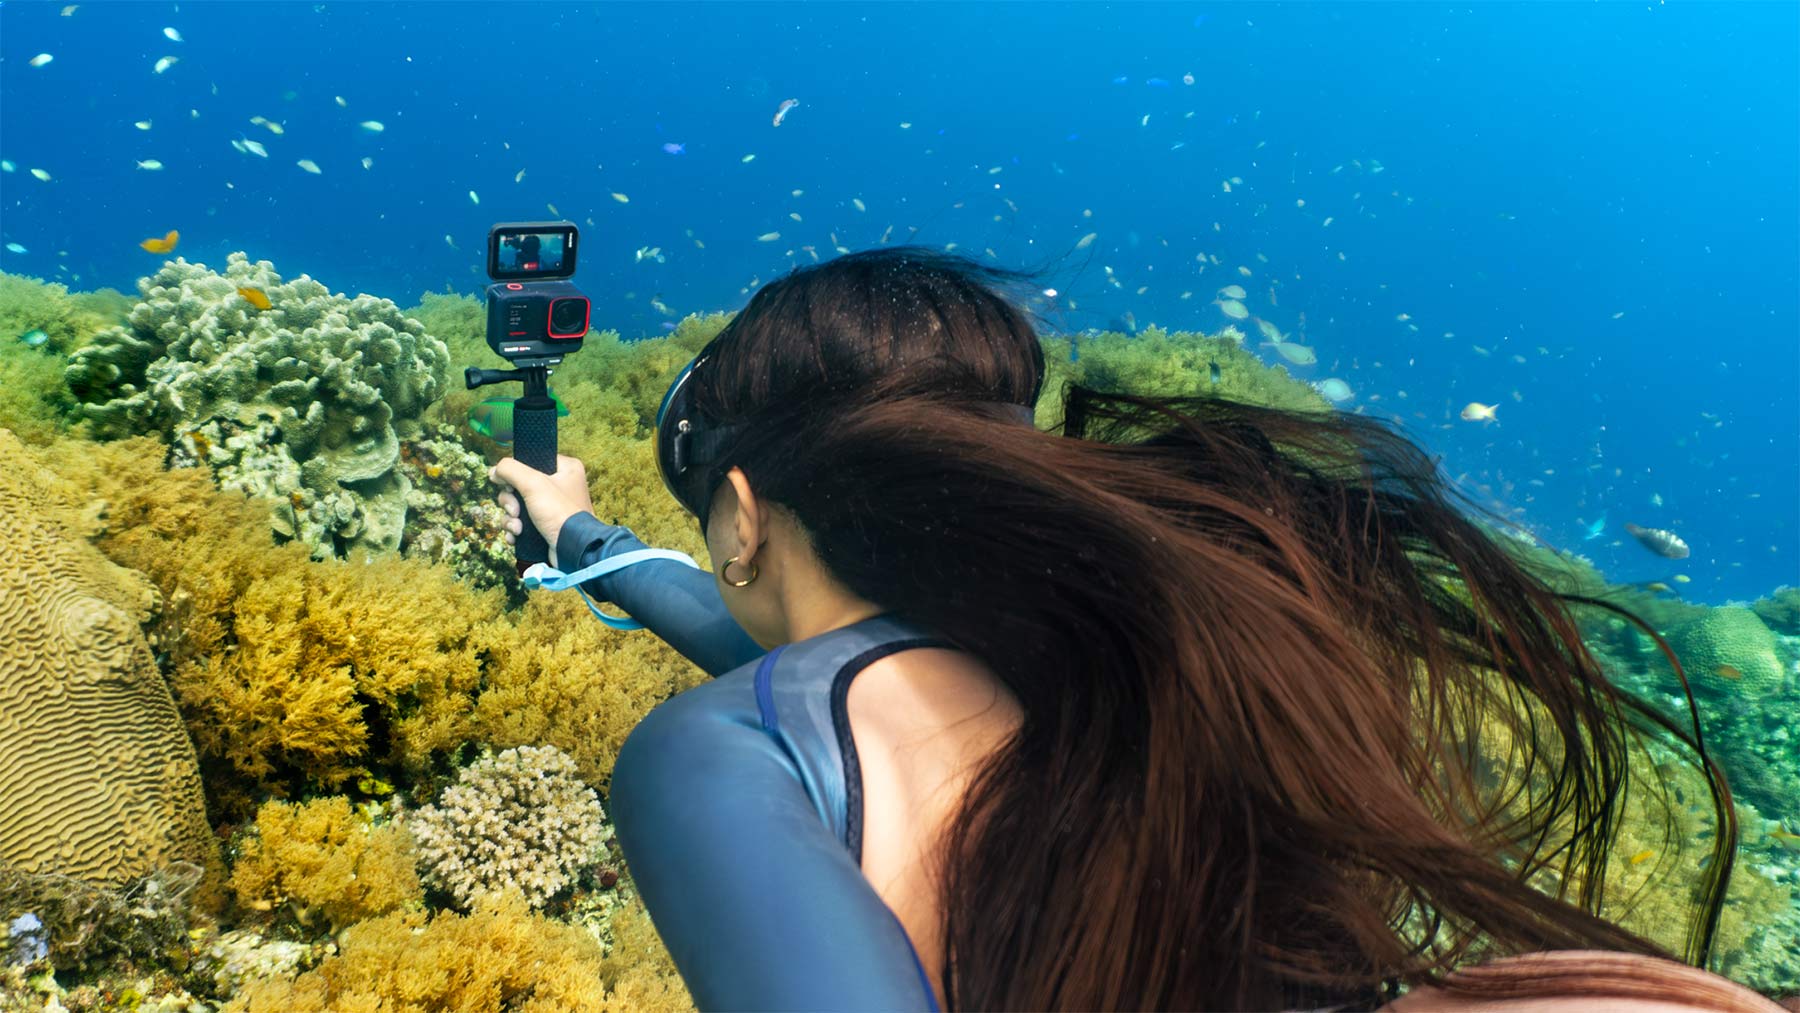 insta360 ace pro action camera underwater with diver